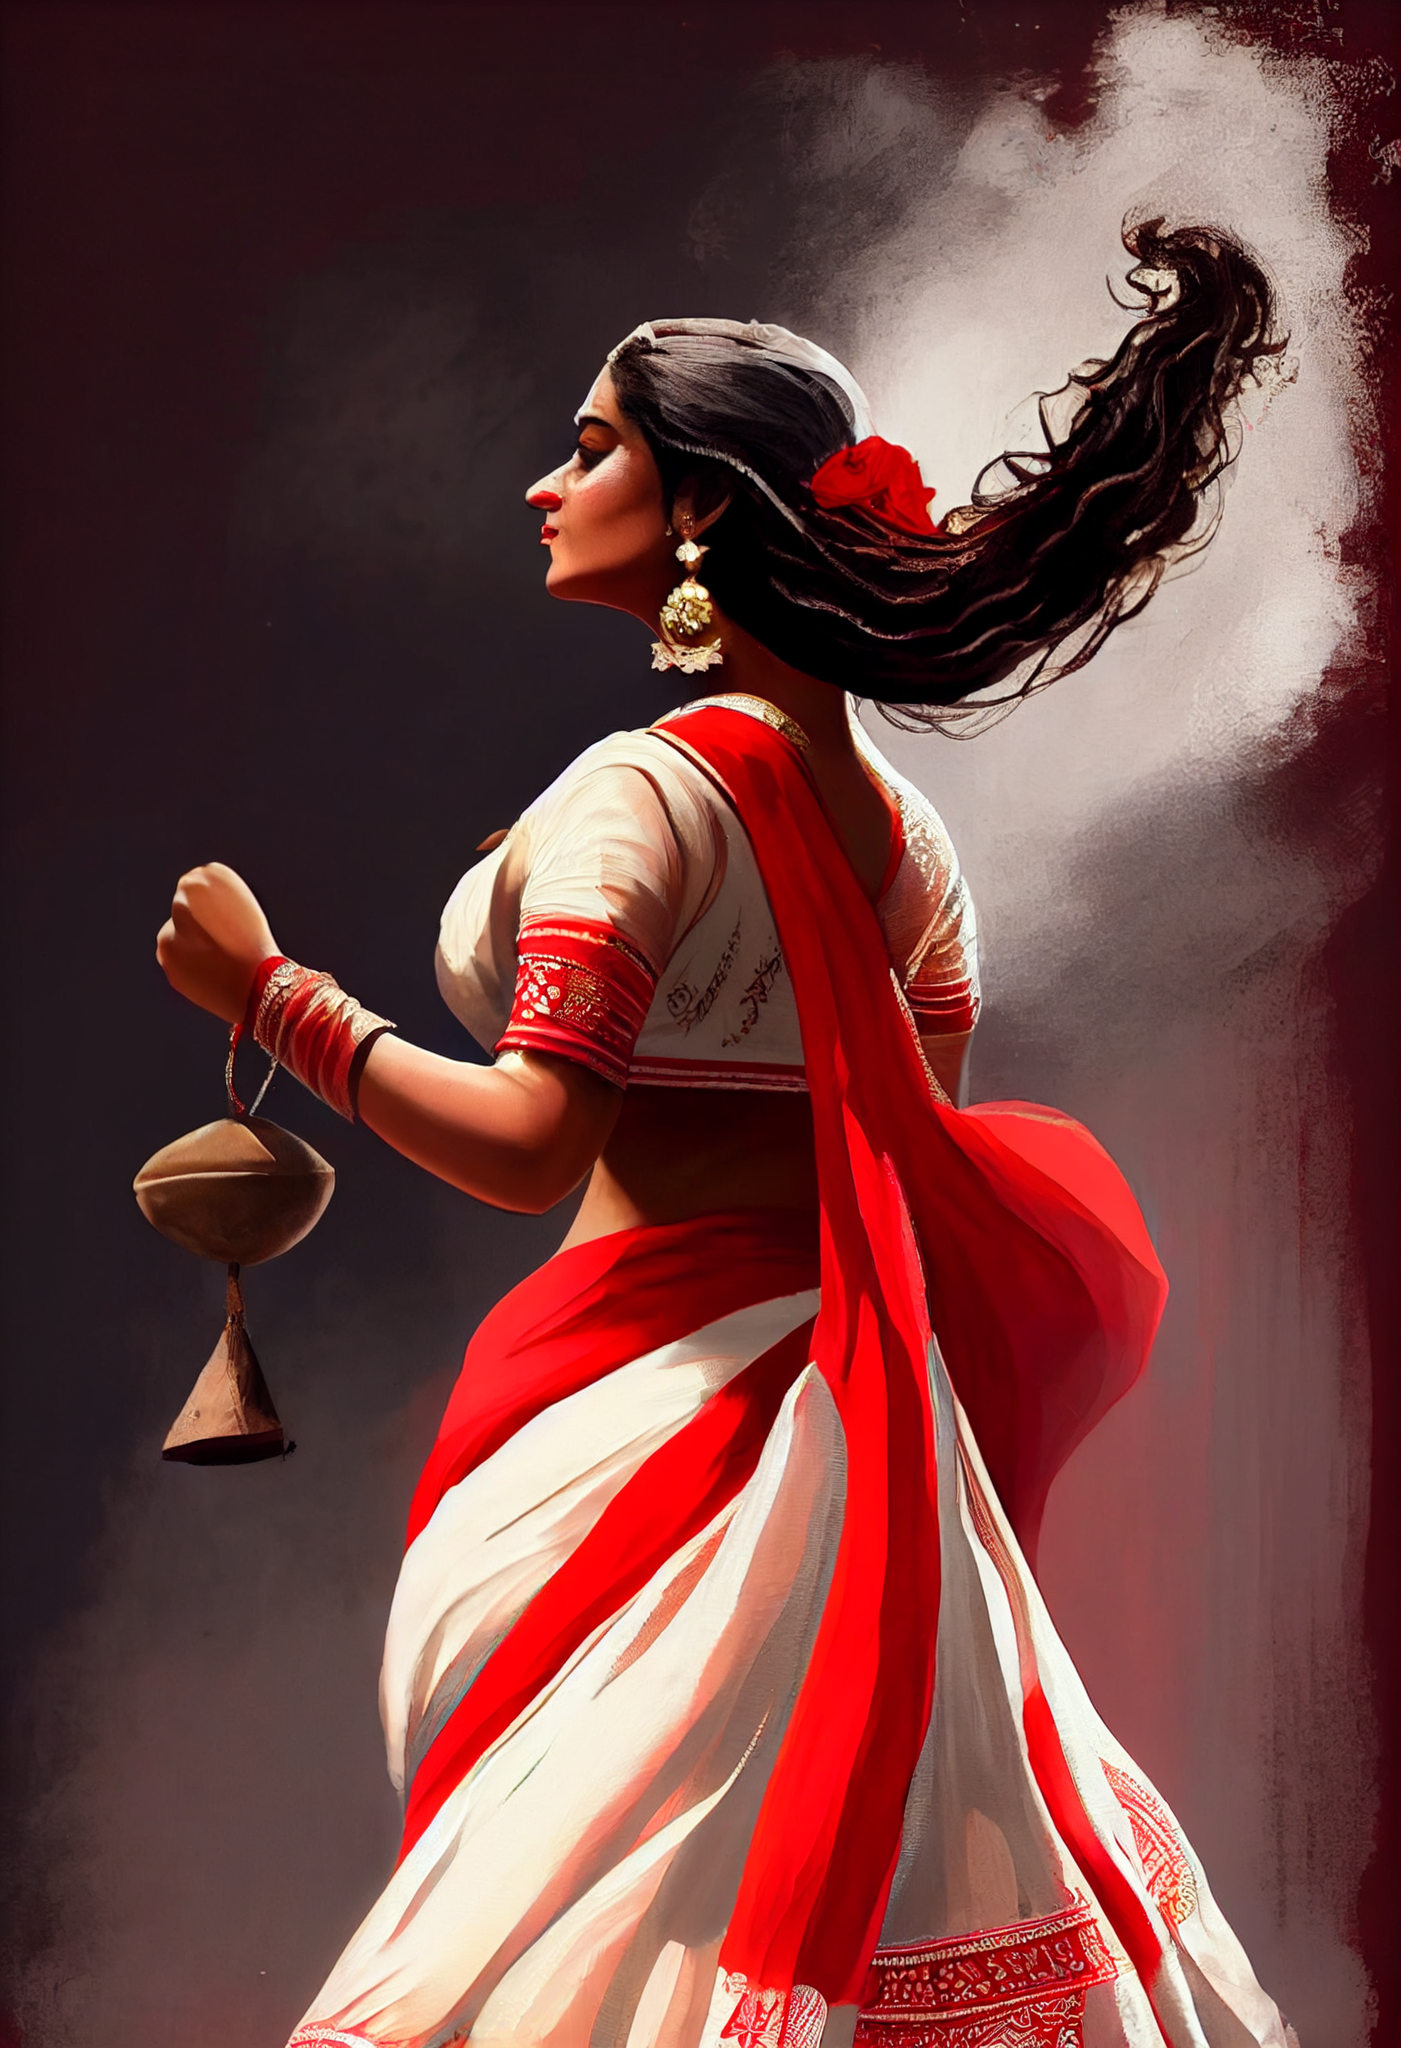 Graceful Moves: A Stunning Art Print of a Bengali Girl Dancing in a Red and White Saree